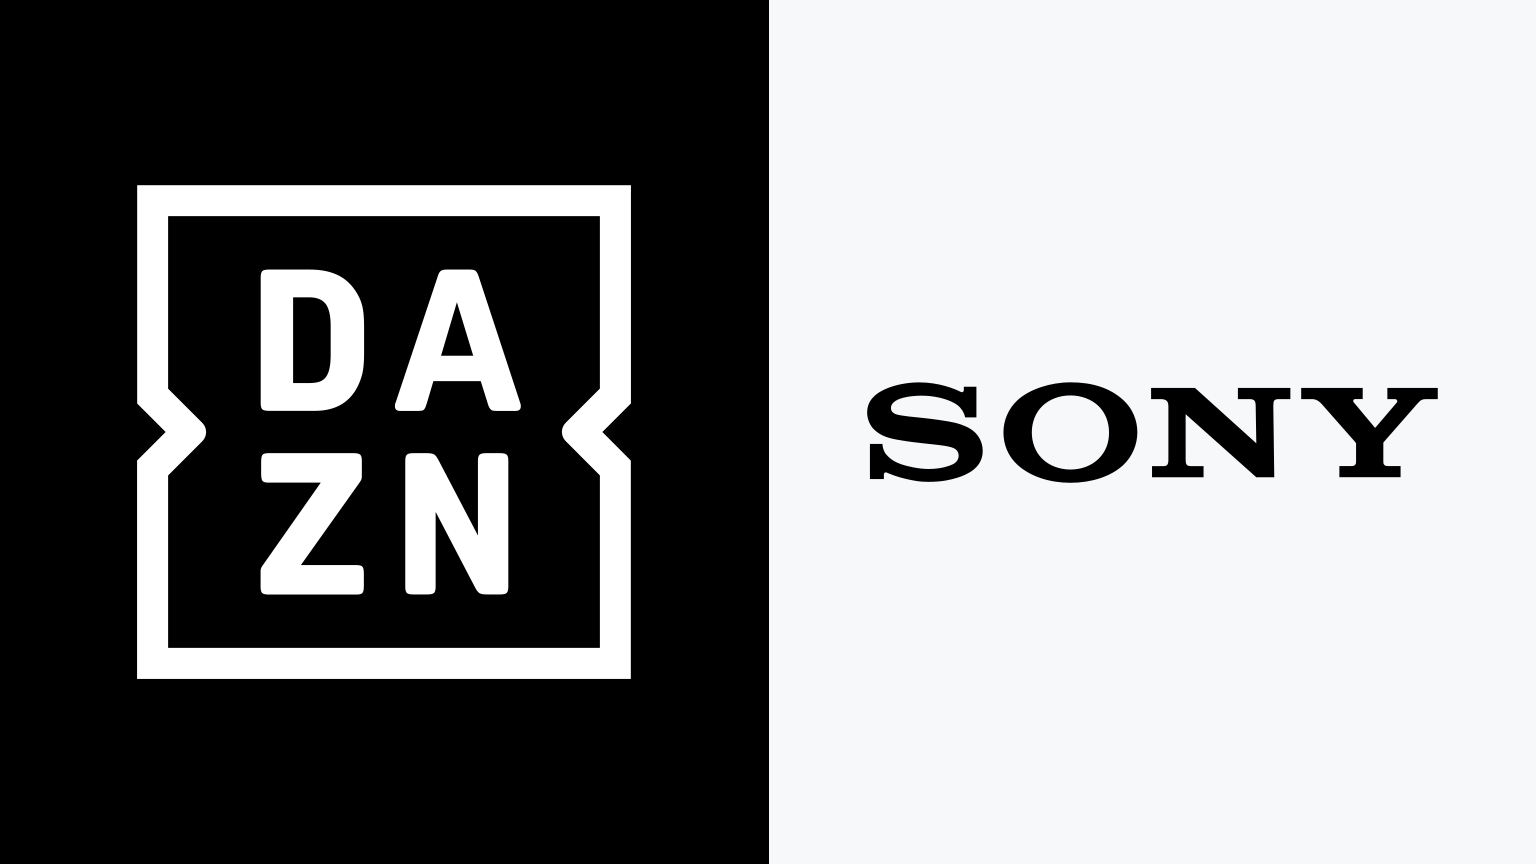 How To Watch Dazn On Sony Smart Tv The Streamable